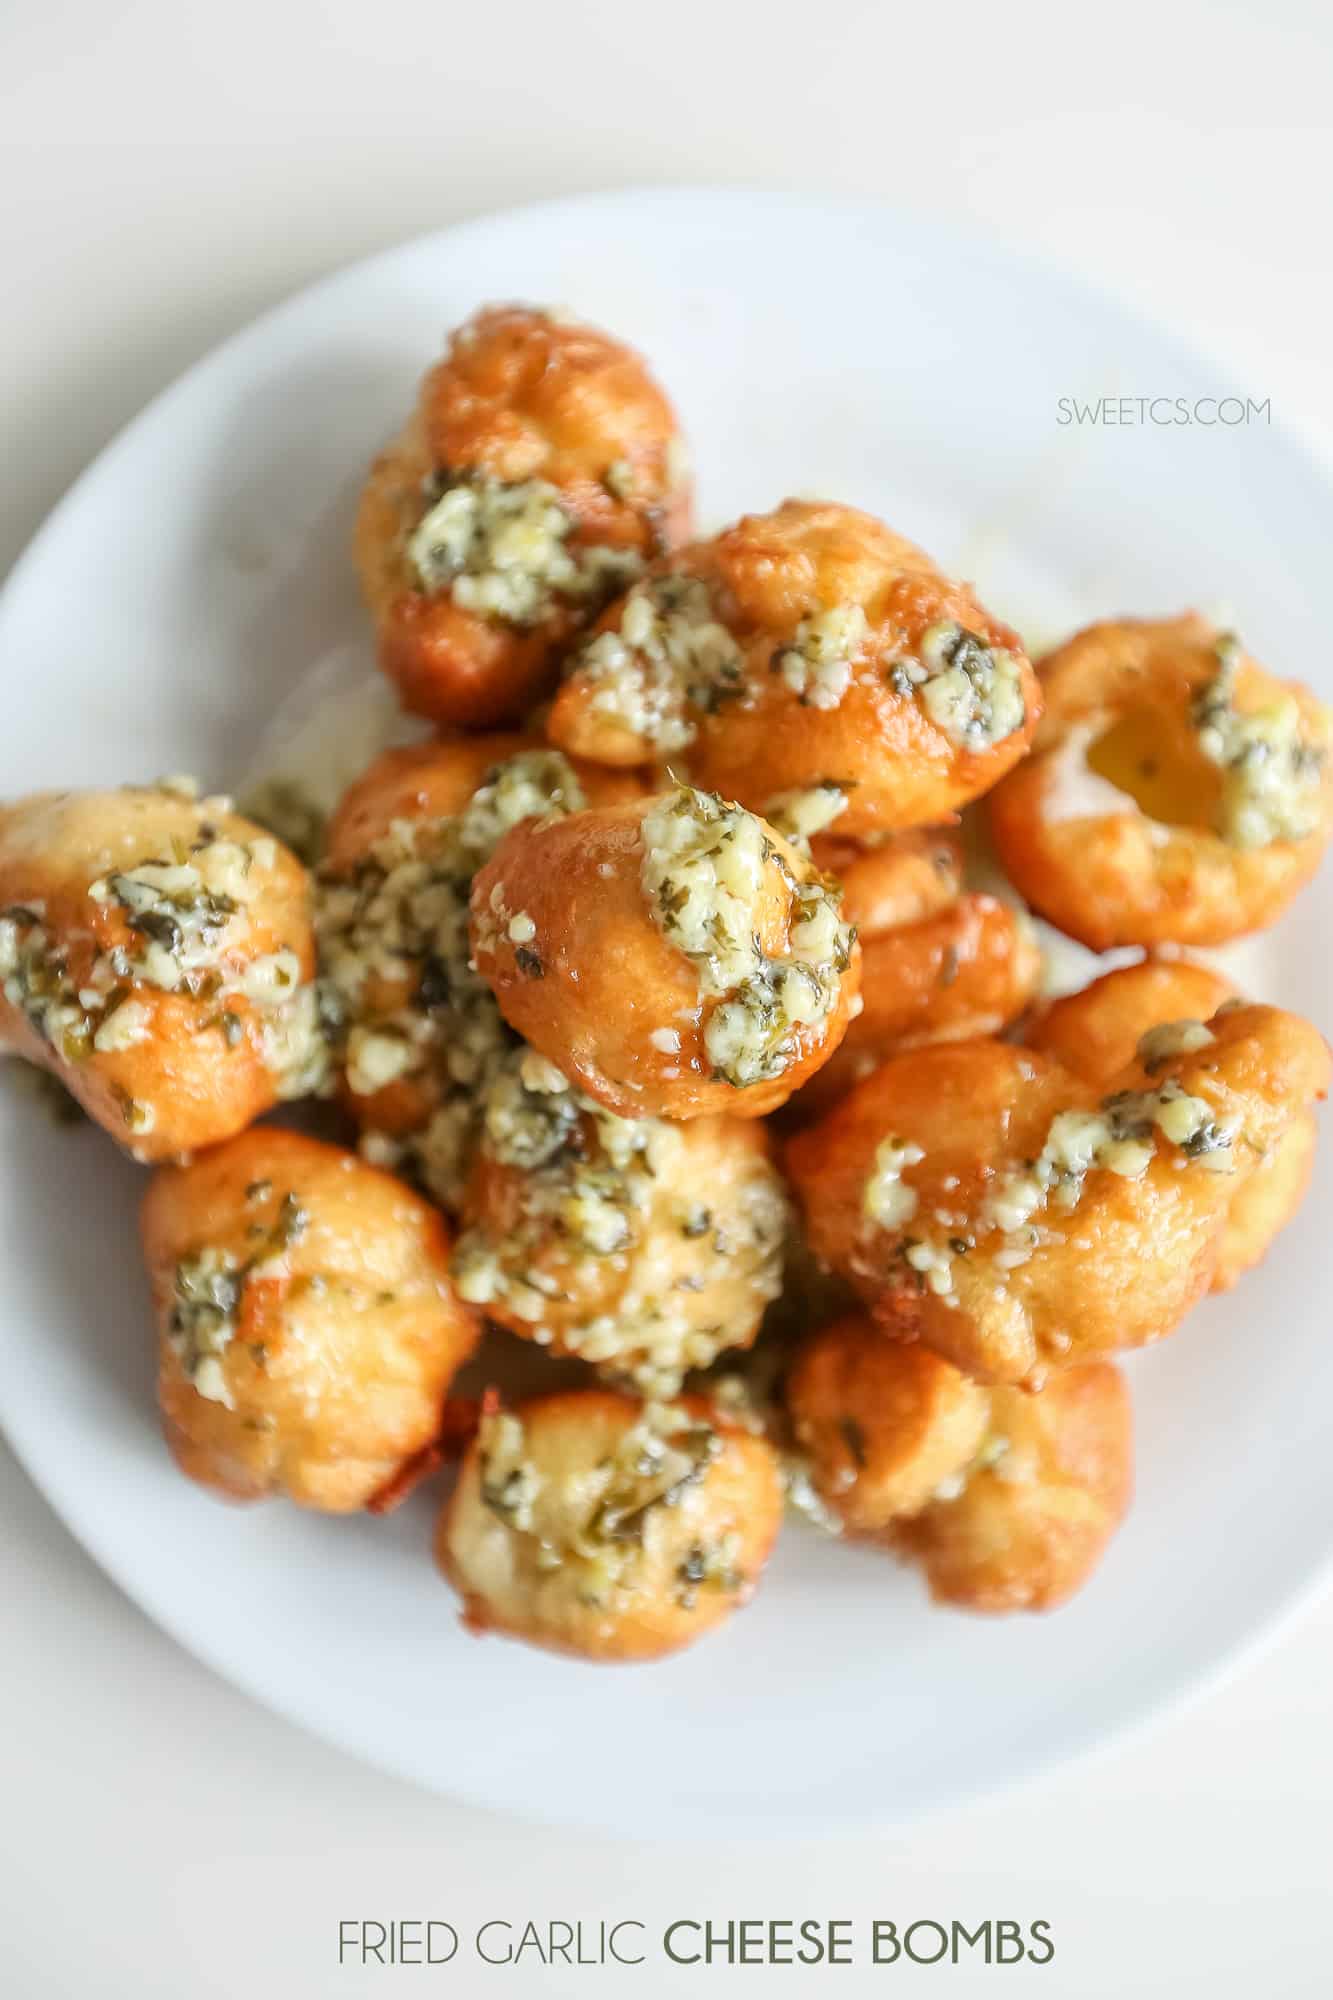 garlic cheese bombs- these are easy fried appetizers that are so good!